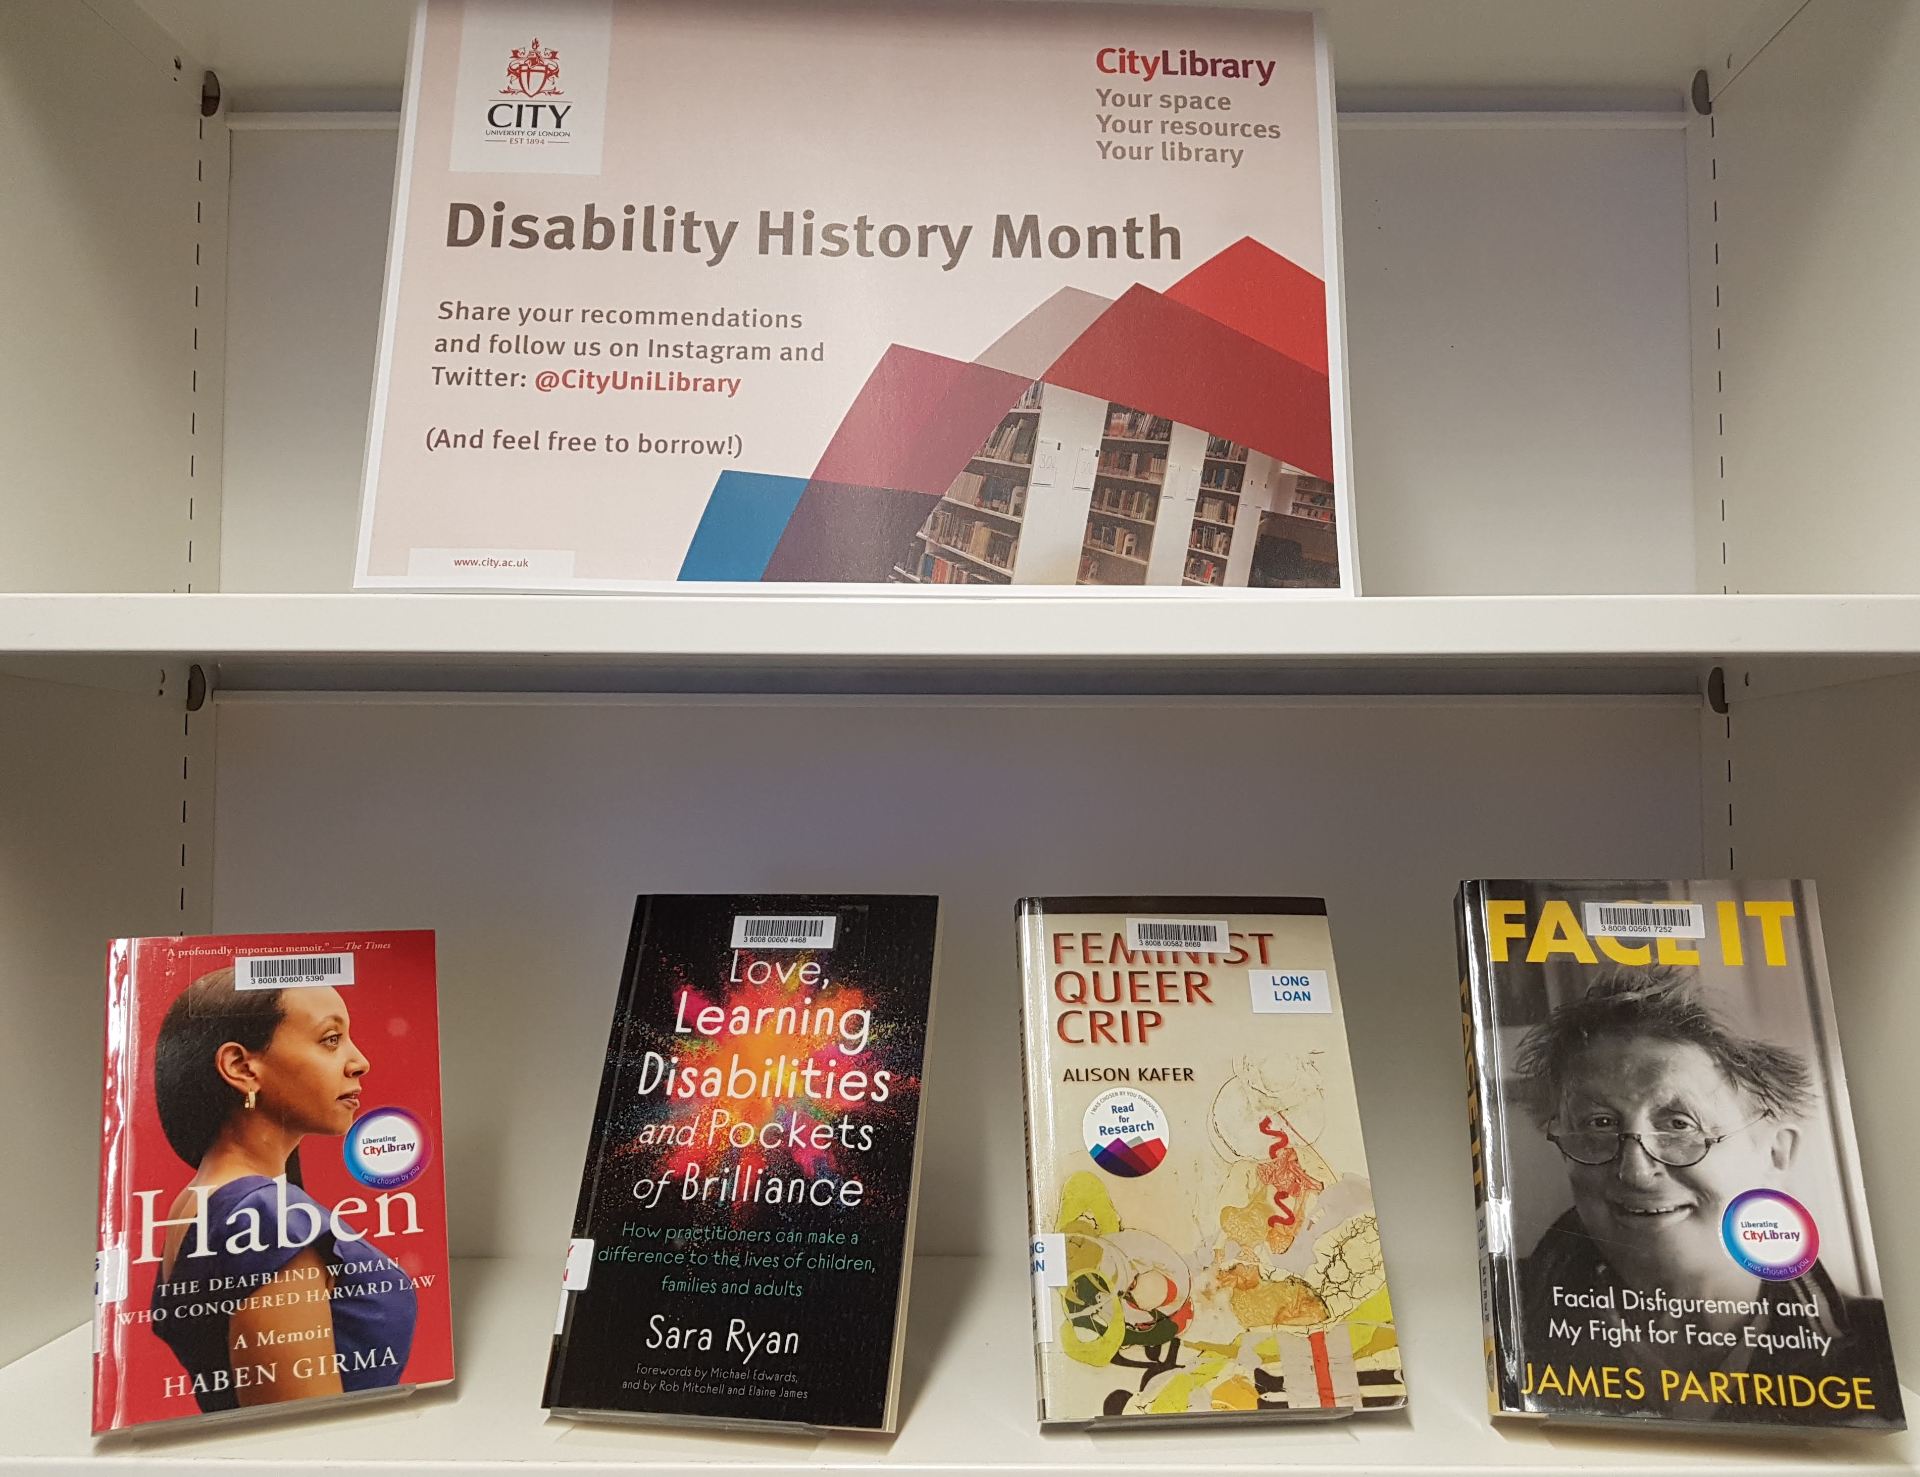 A picture of Disability History Month's book display at Northampton Square Library